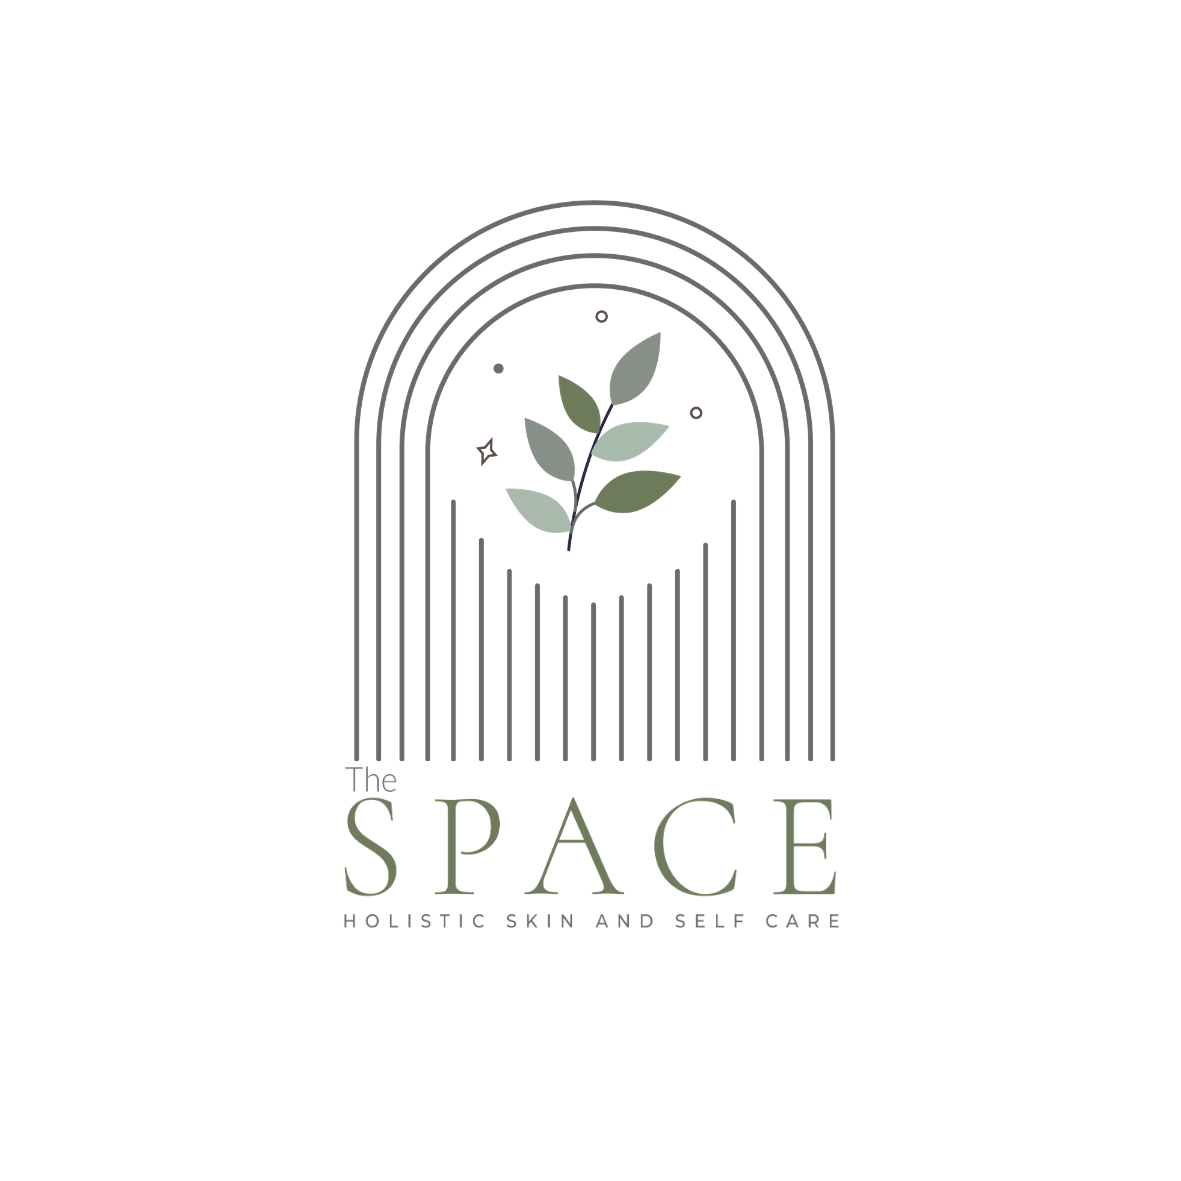 The SPACE